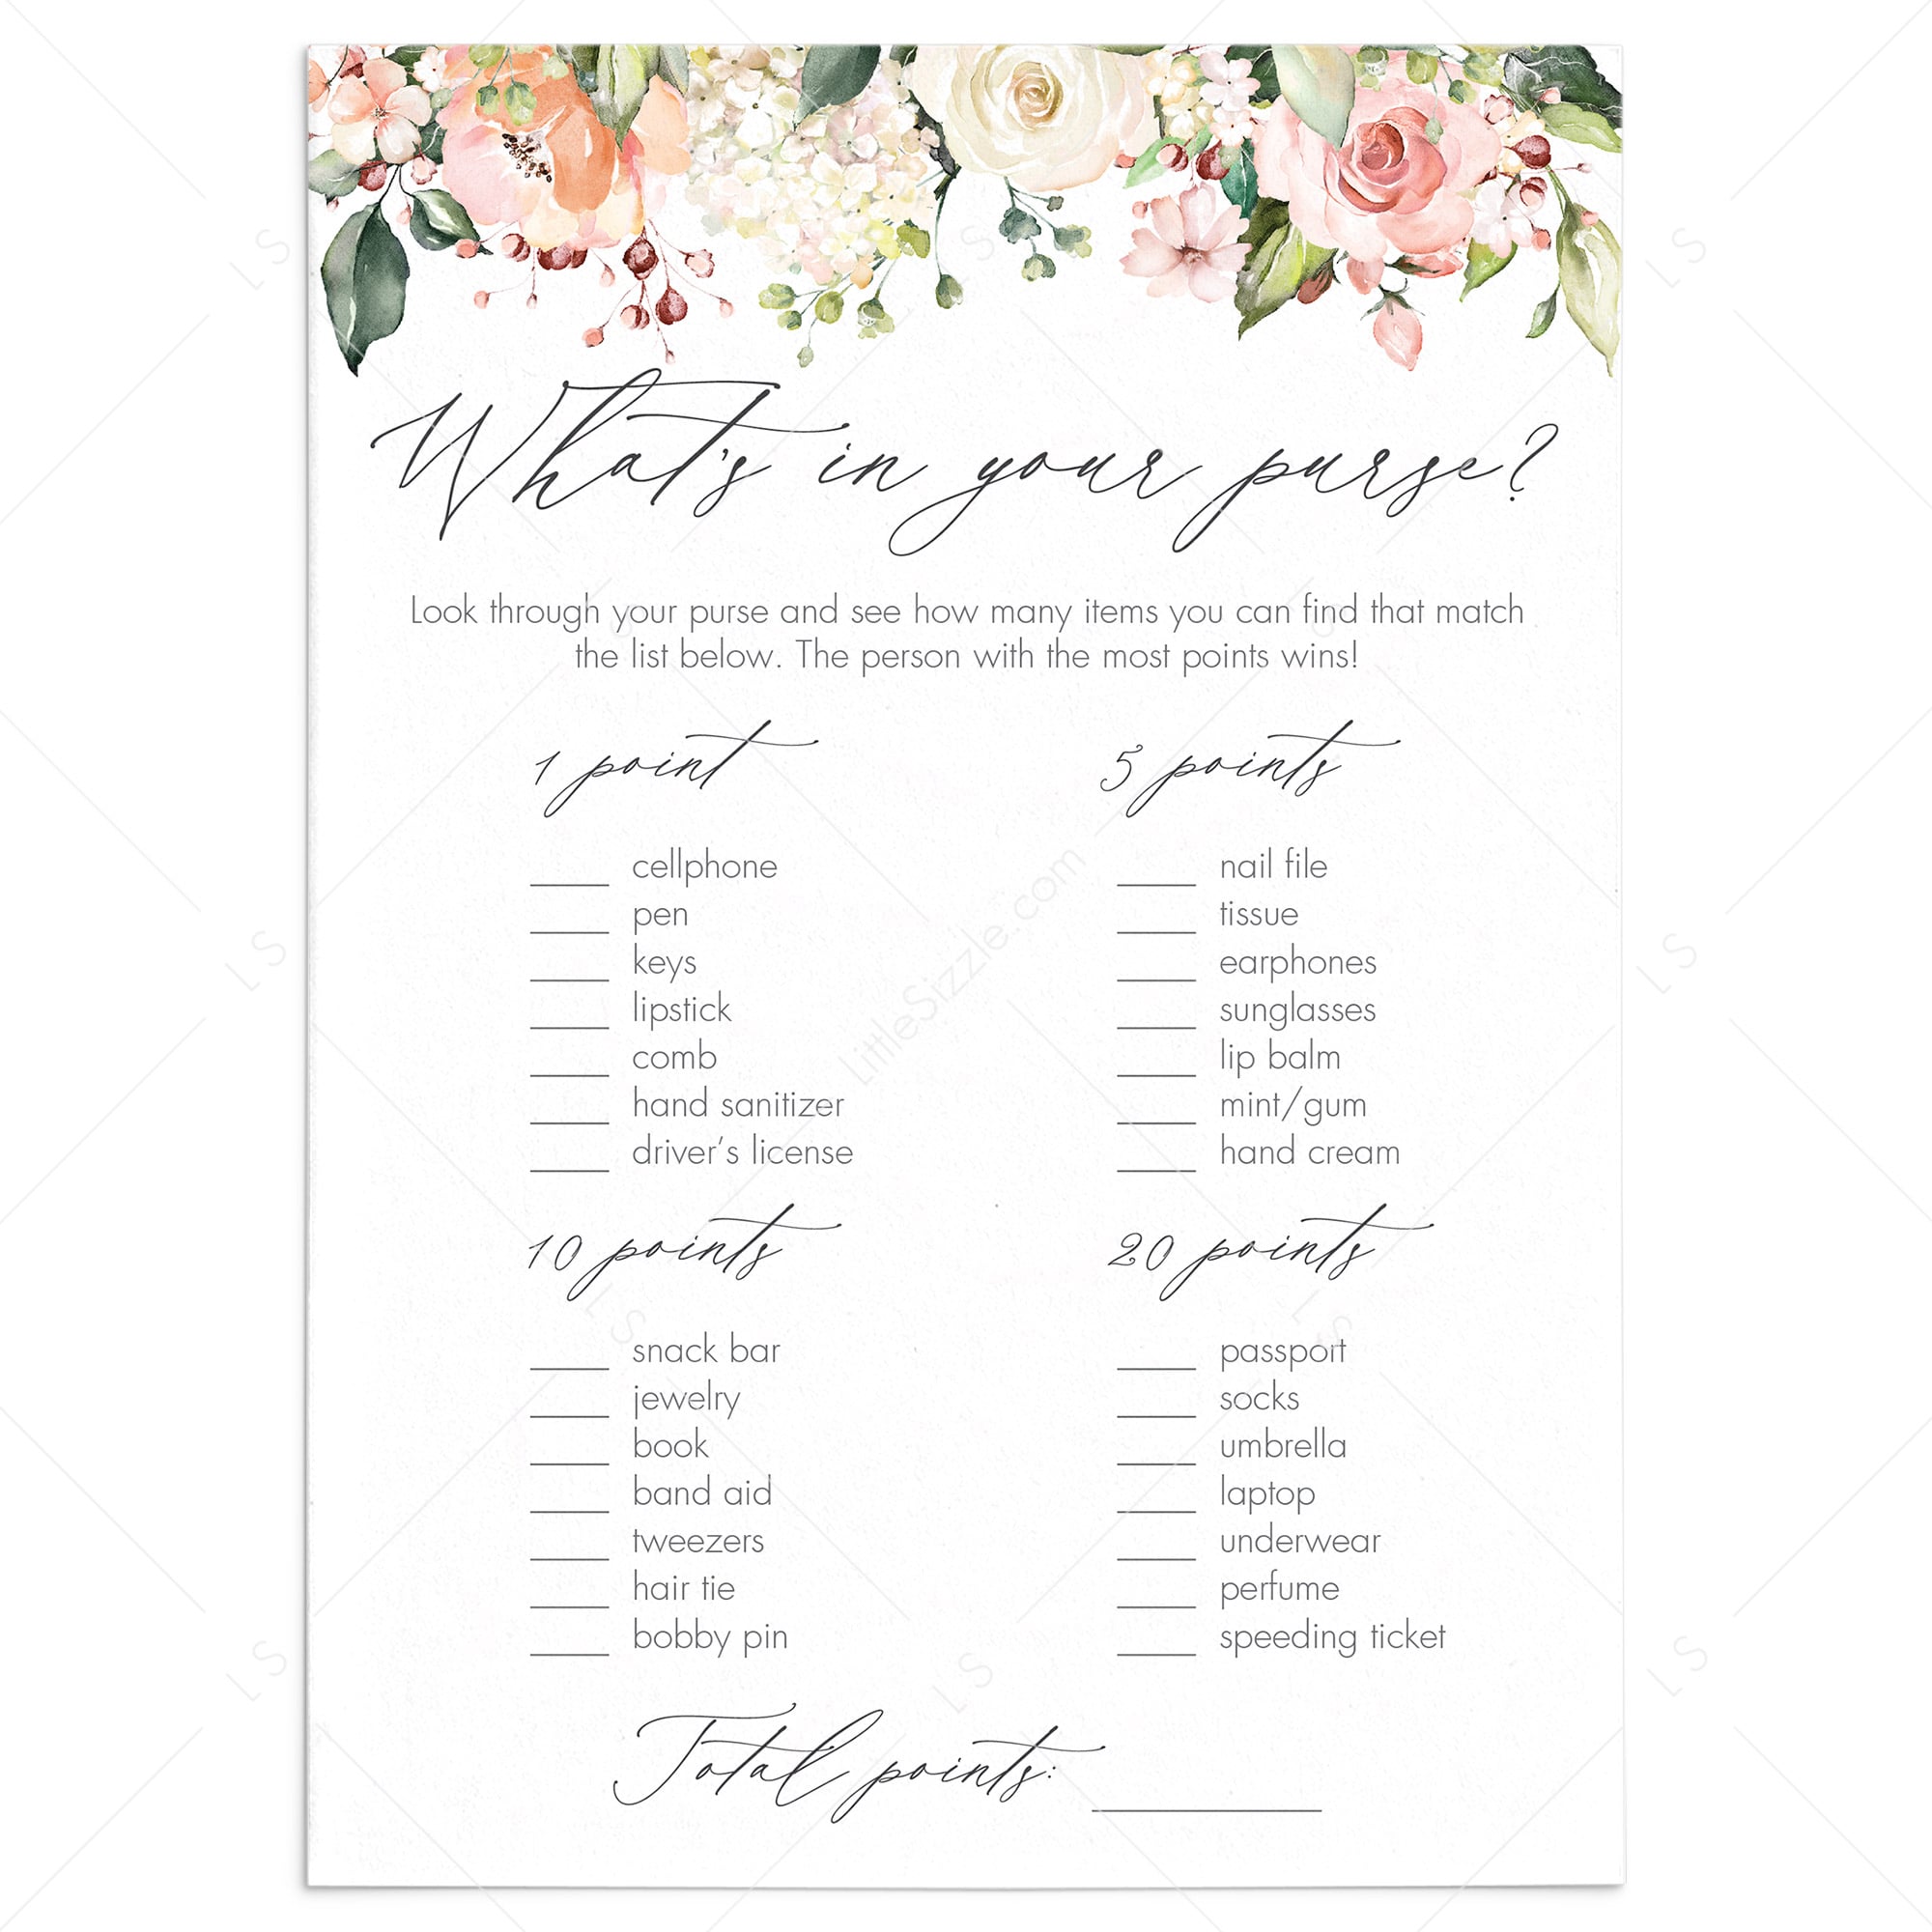 Whats in your purse bridal shower games download by LittleSizzle